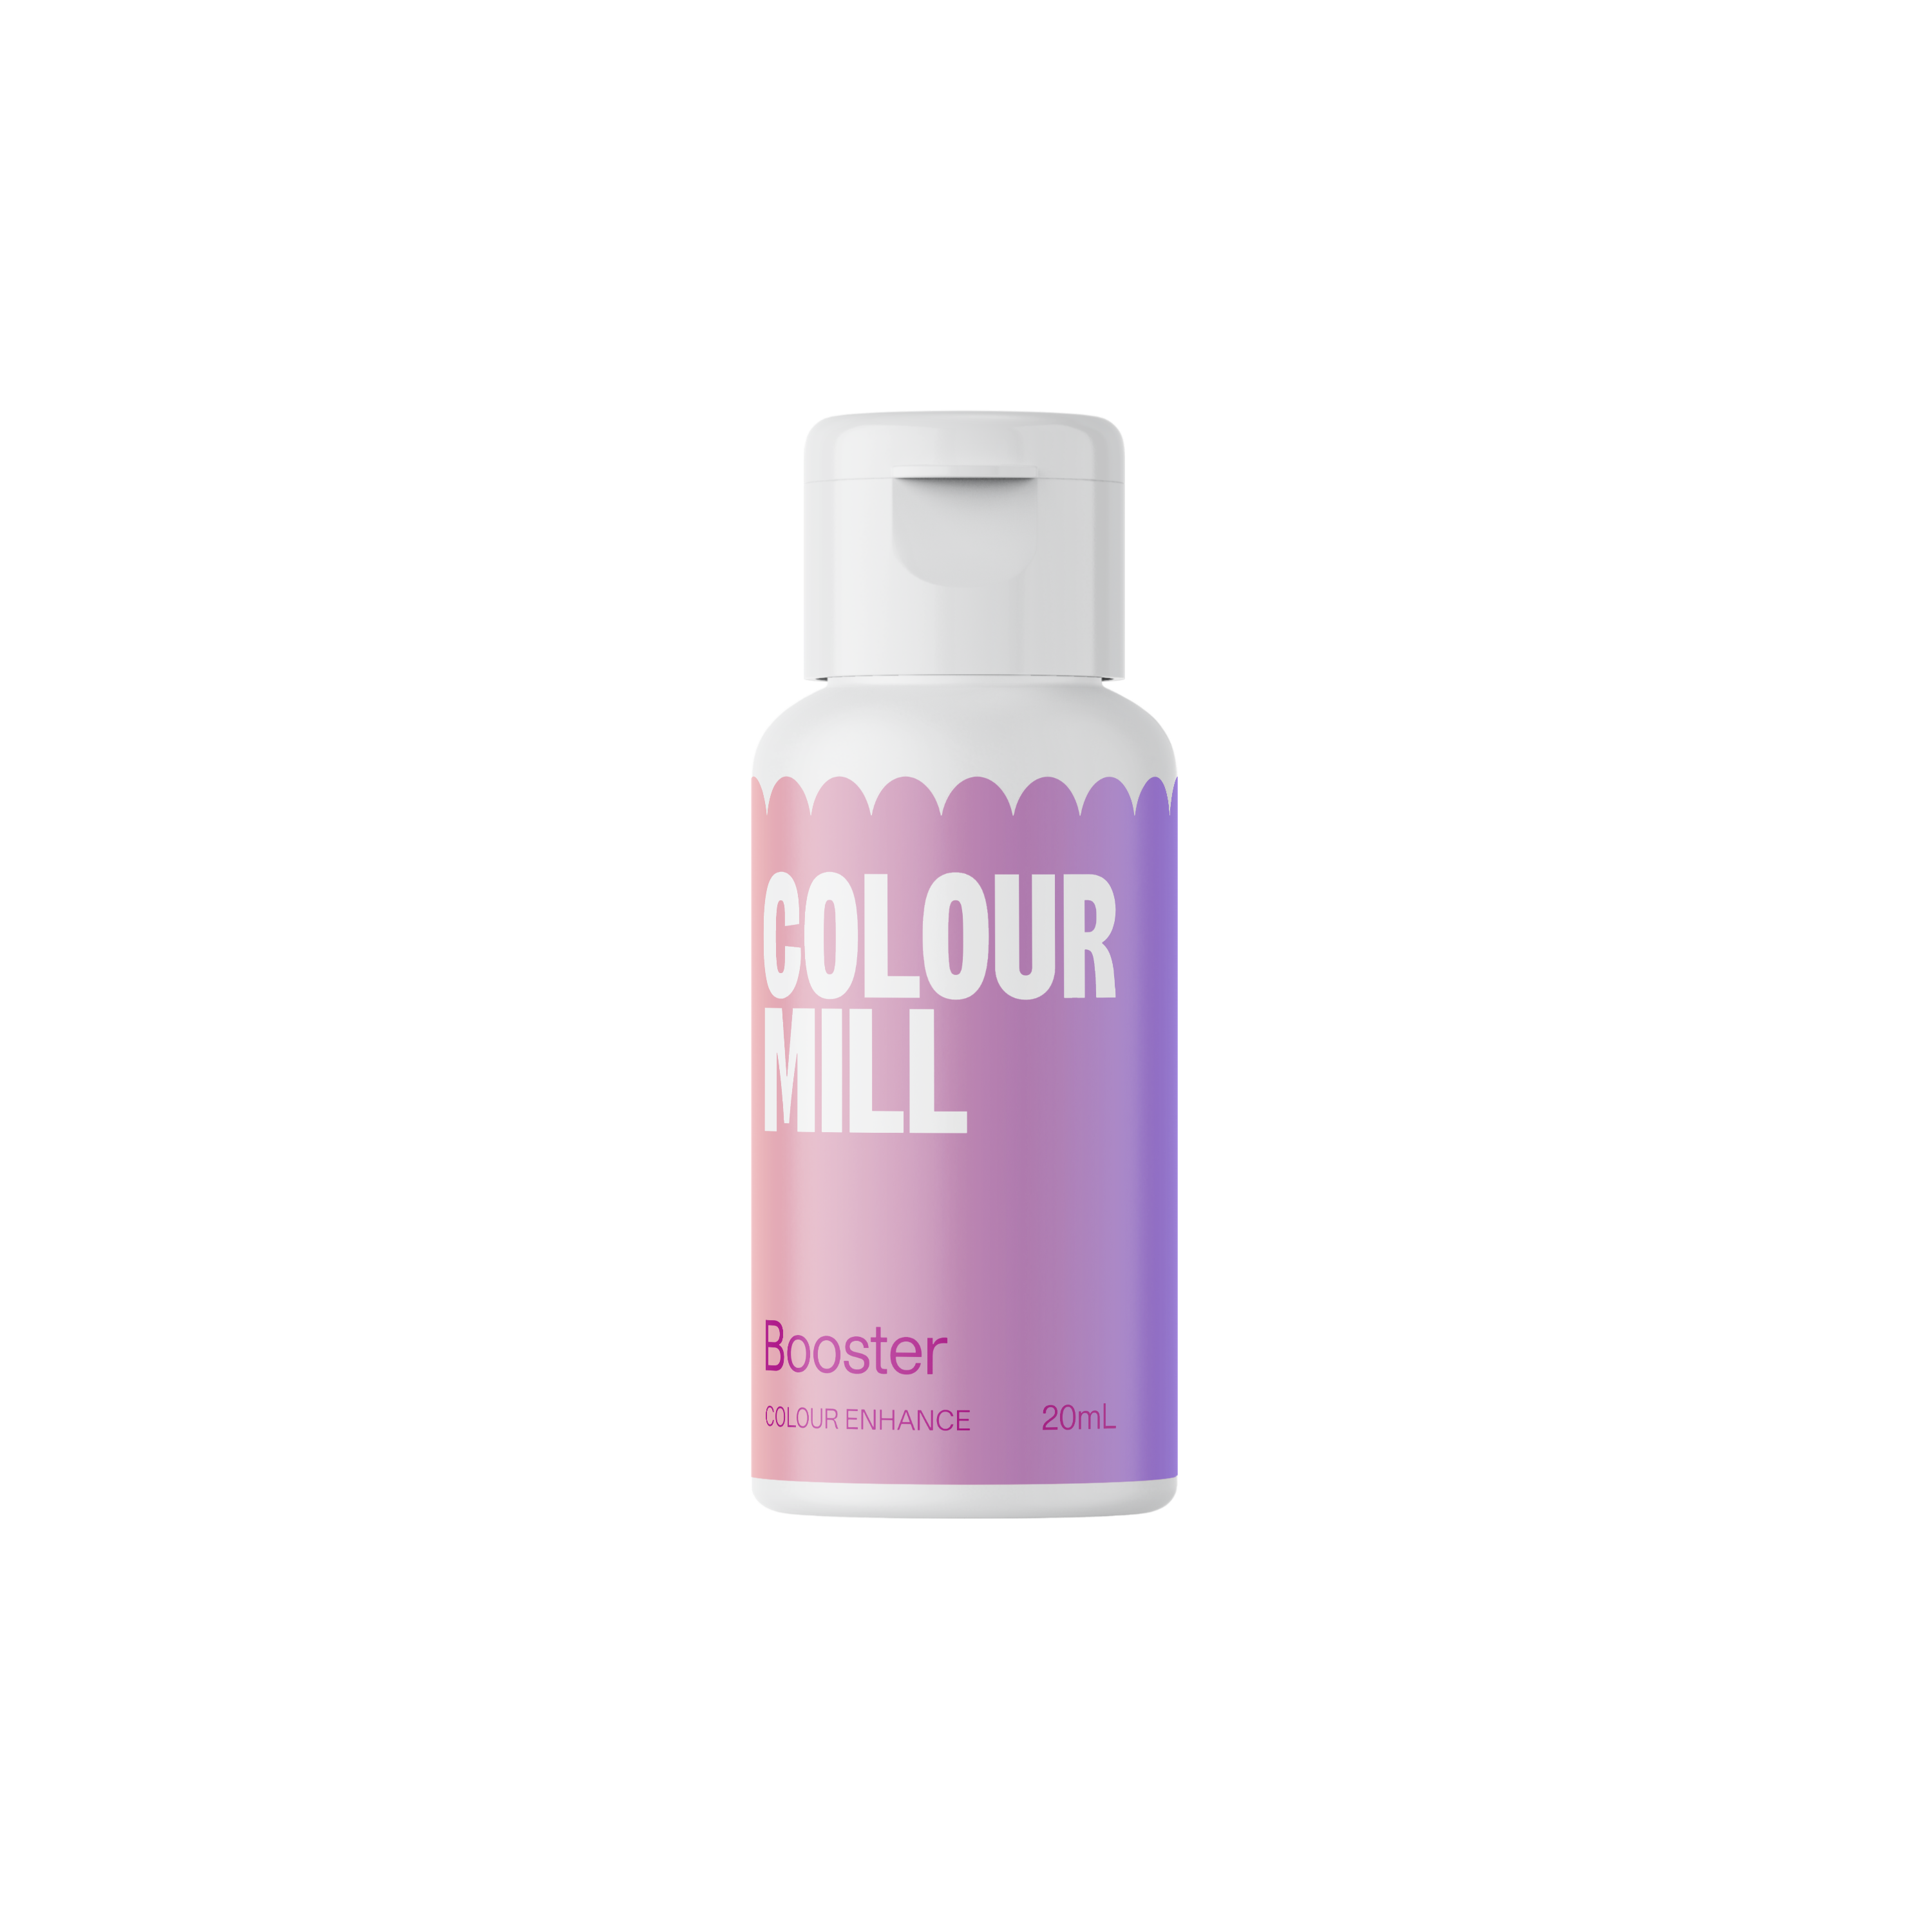 Colour Mill Oil Based Food Colour 20ml - Booster